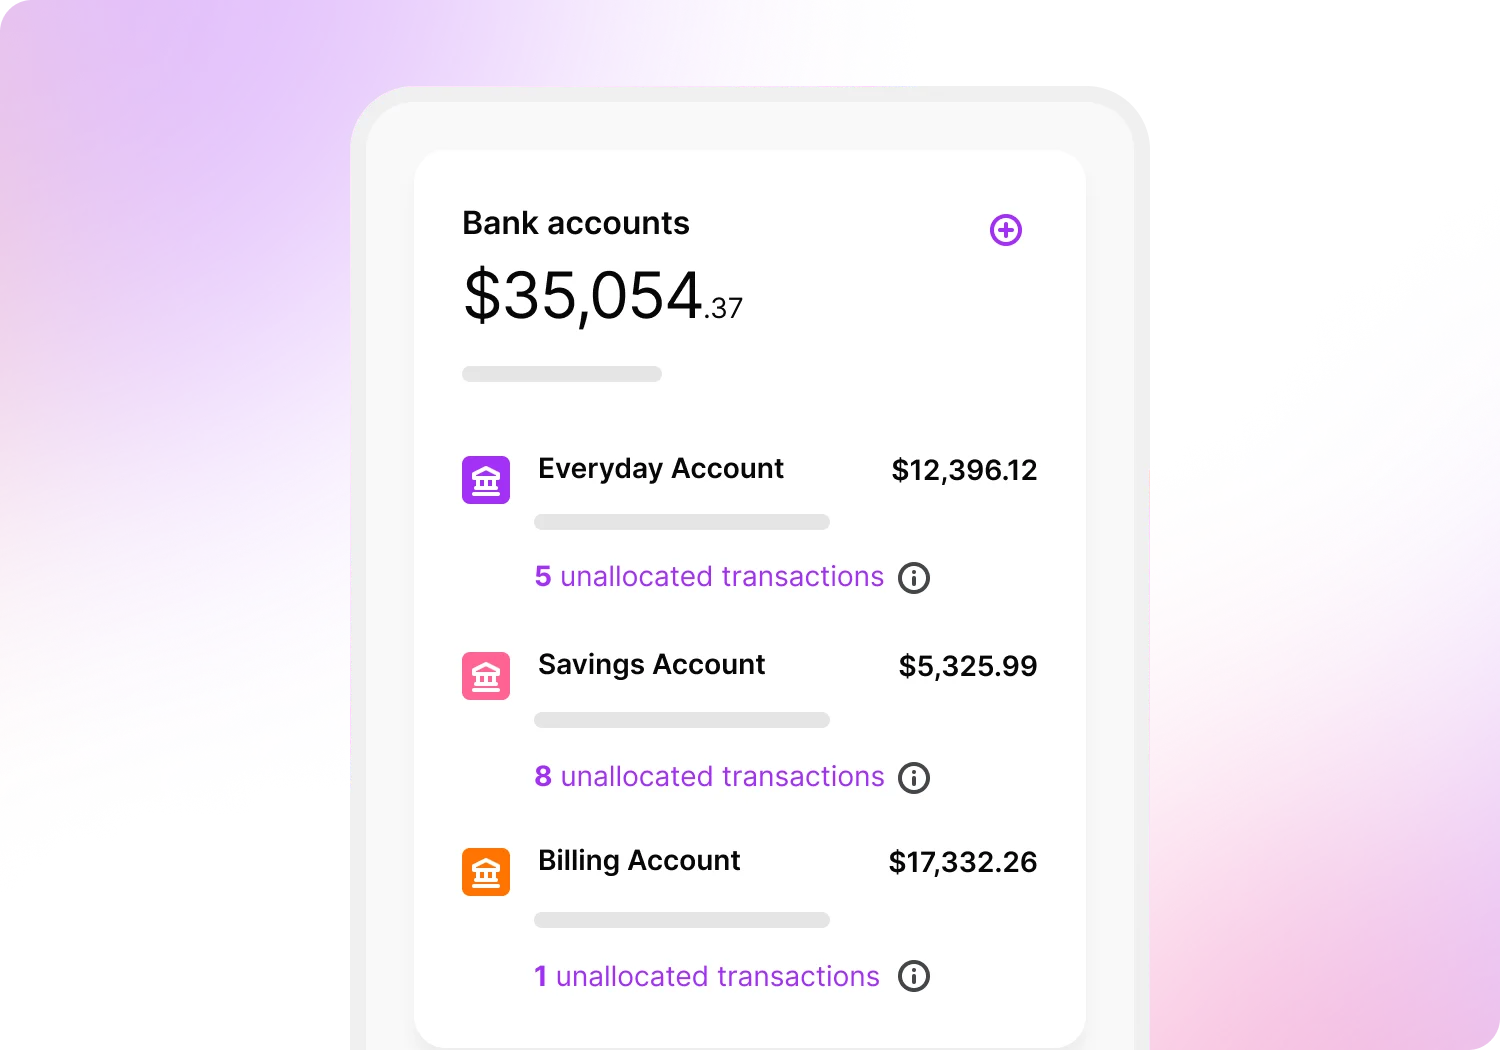 A render showing bank account information.